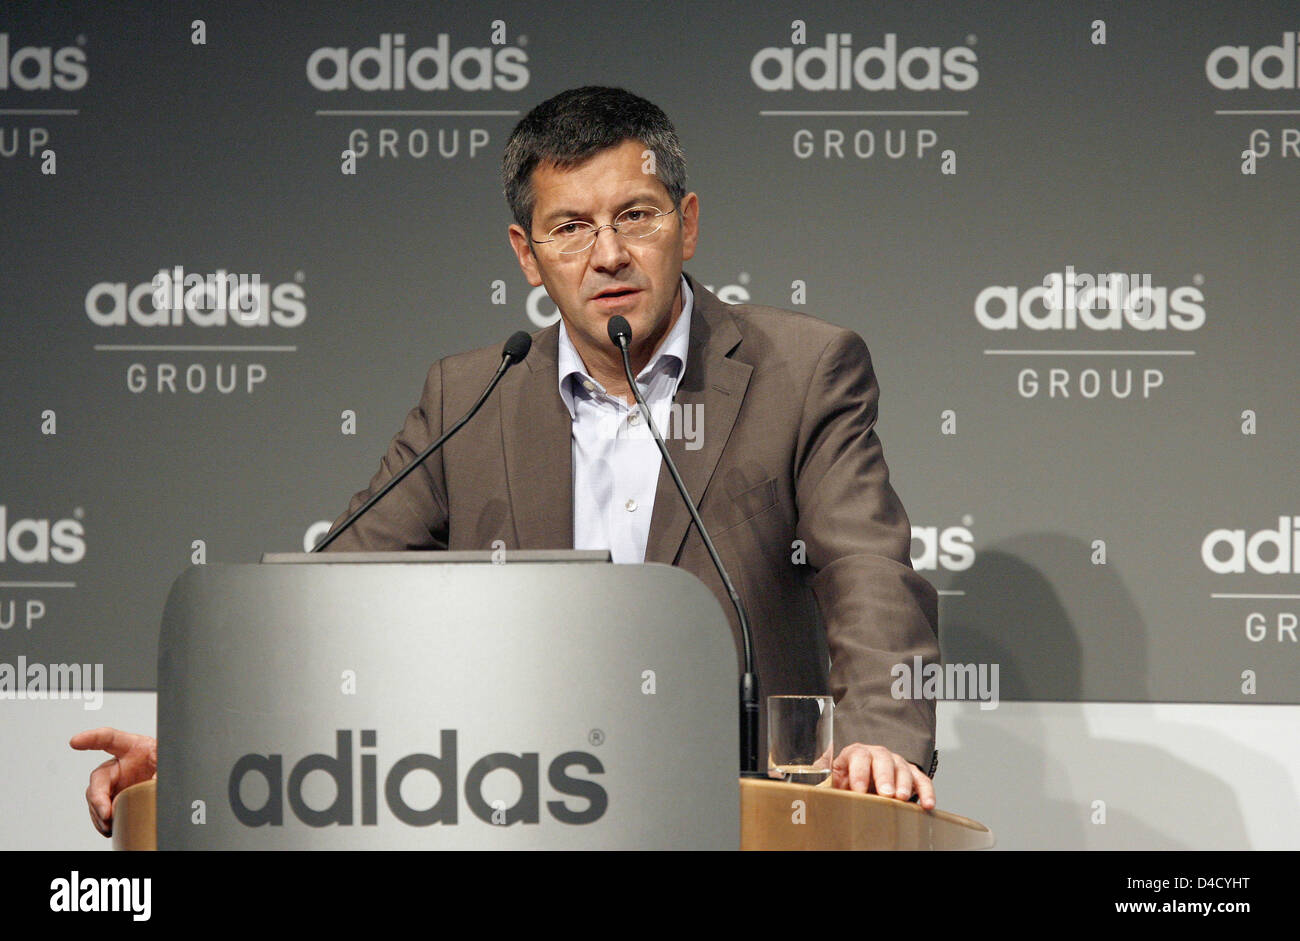 adidas CEO Herbert Hainer speaks during a balance press conference at the  company's headquarters in Herzogenaurach, Germany, 05 March 2008. For the  seventh consecutive time adidas managed to increase its profit by